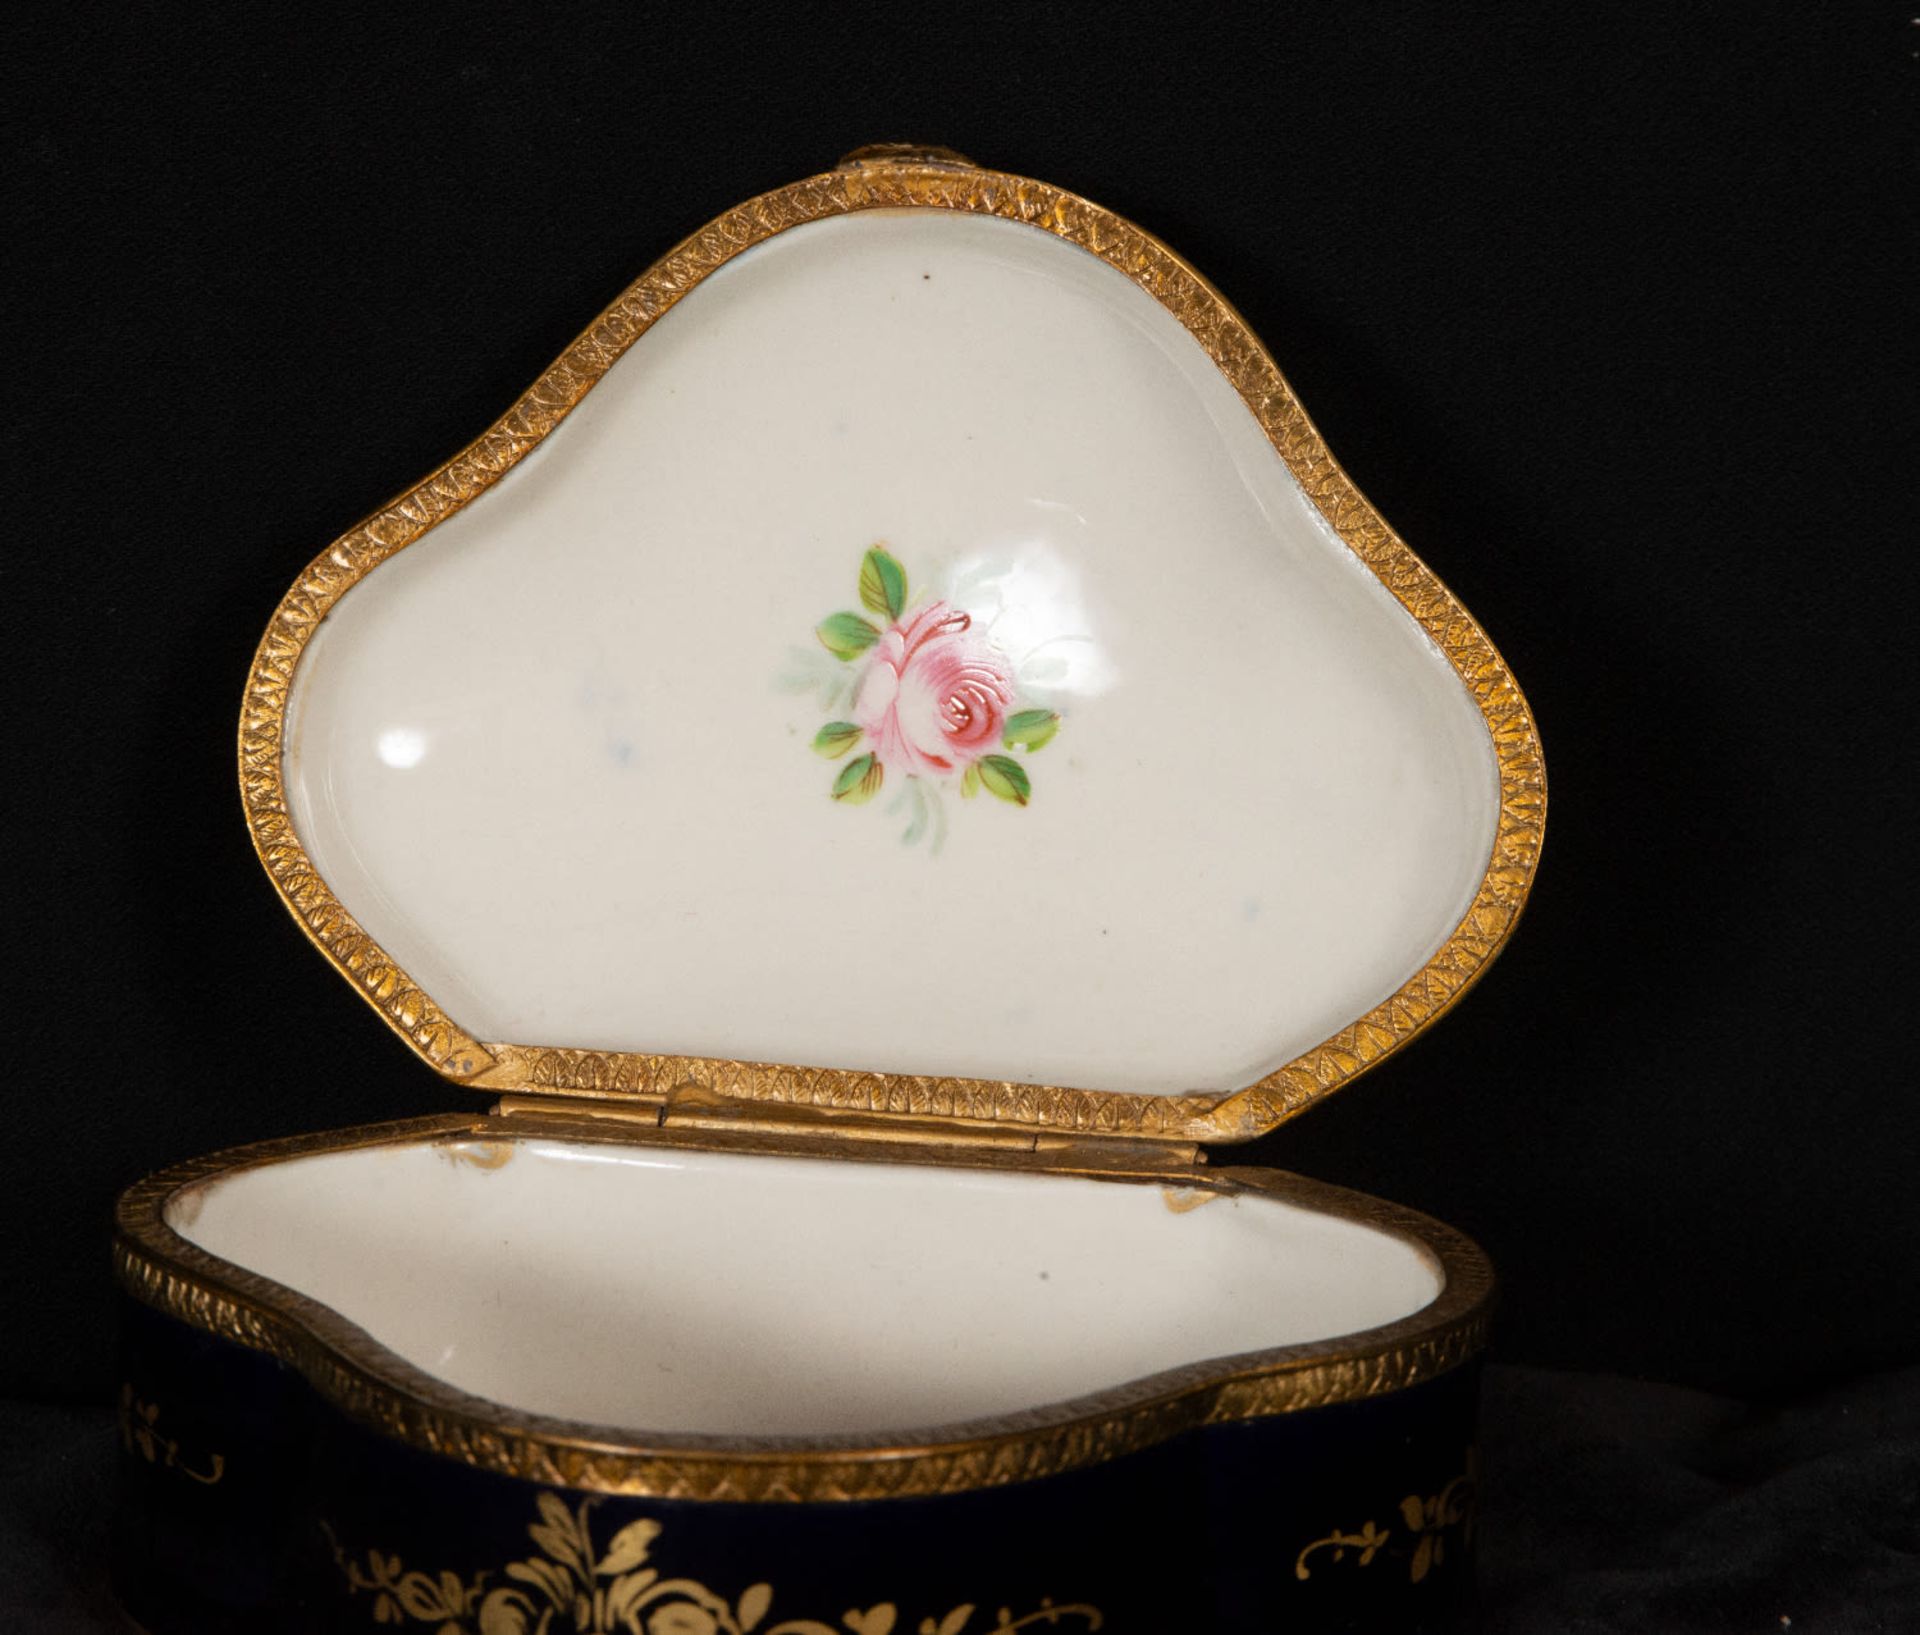 Pair of Sèvres porcelain dressing table jewelry boxes and porcelain swan, 19th century - Image 8 of 10